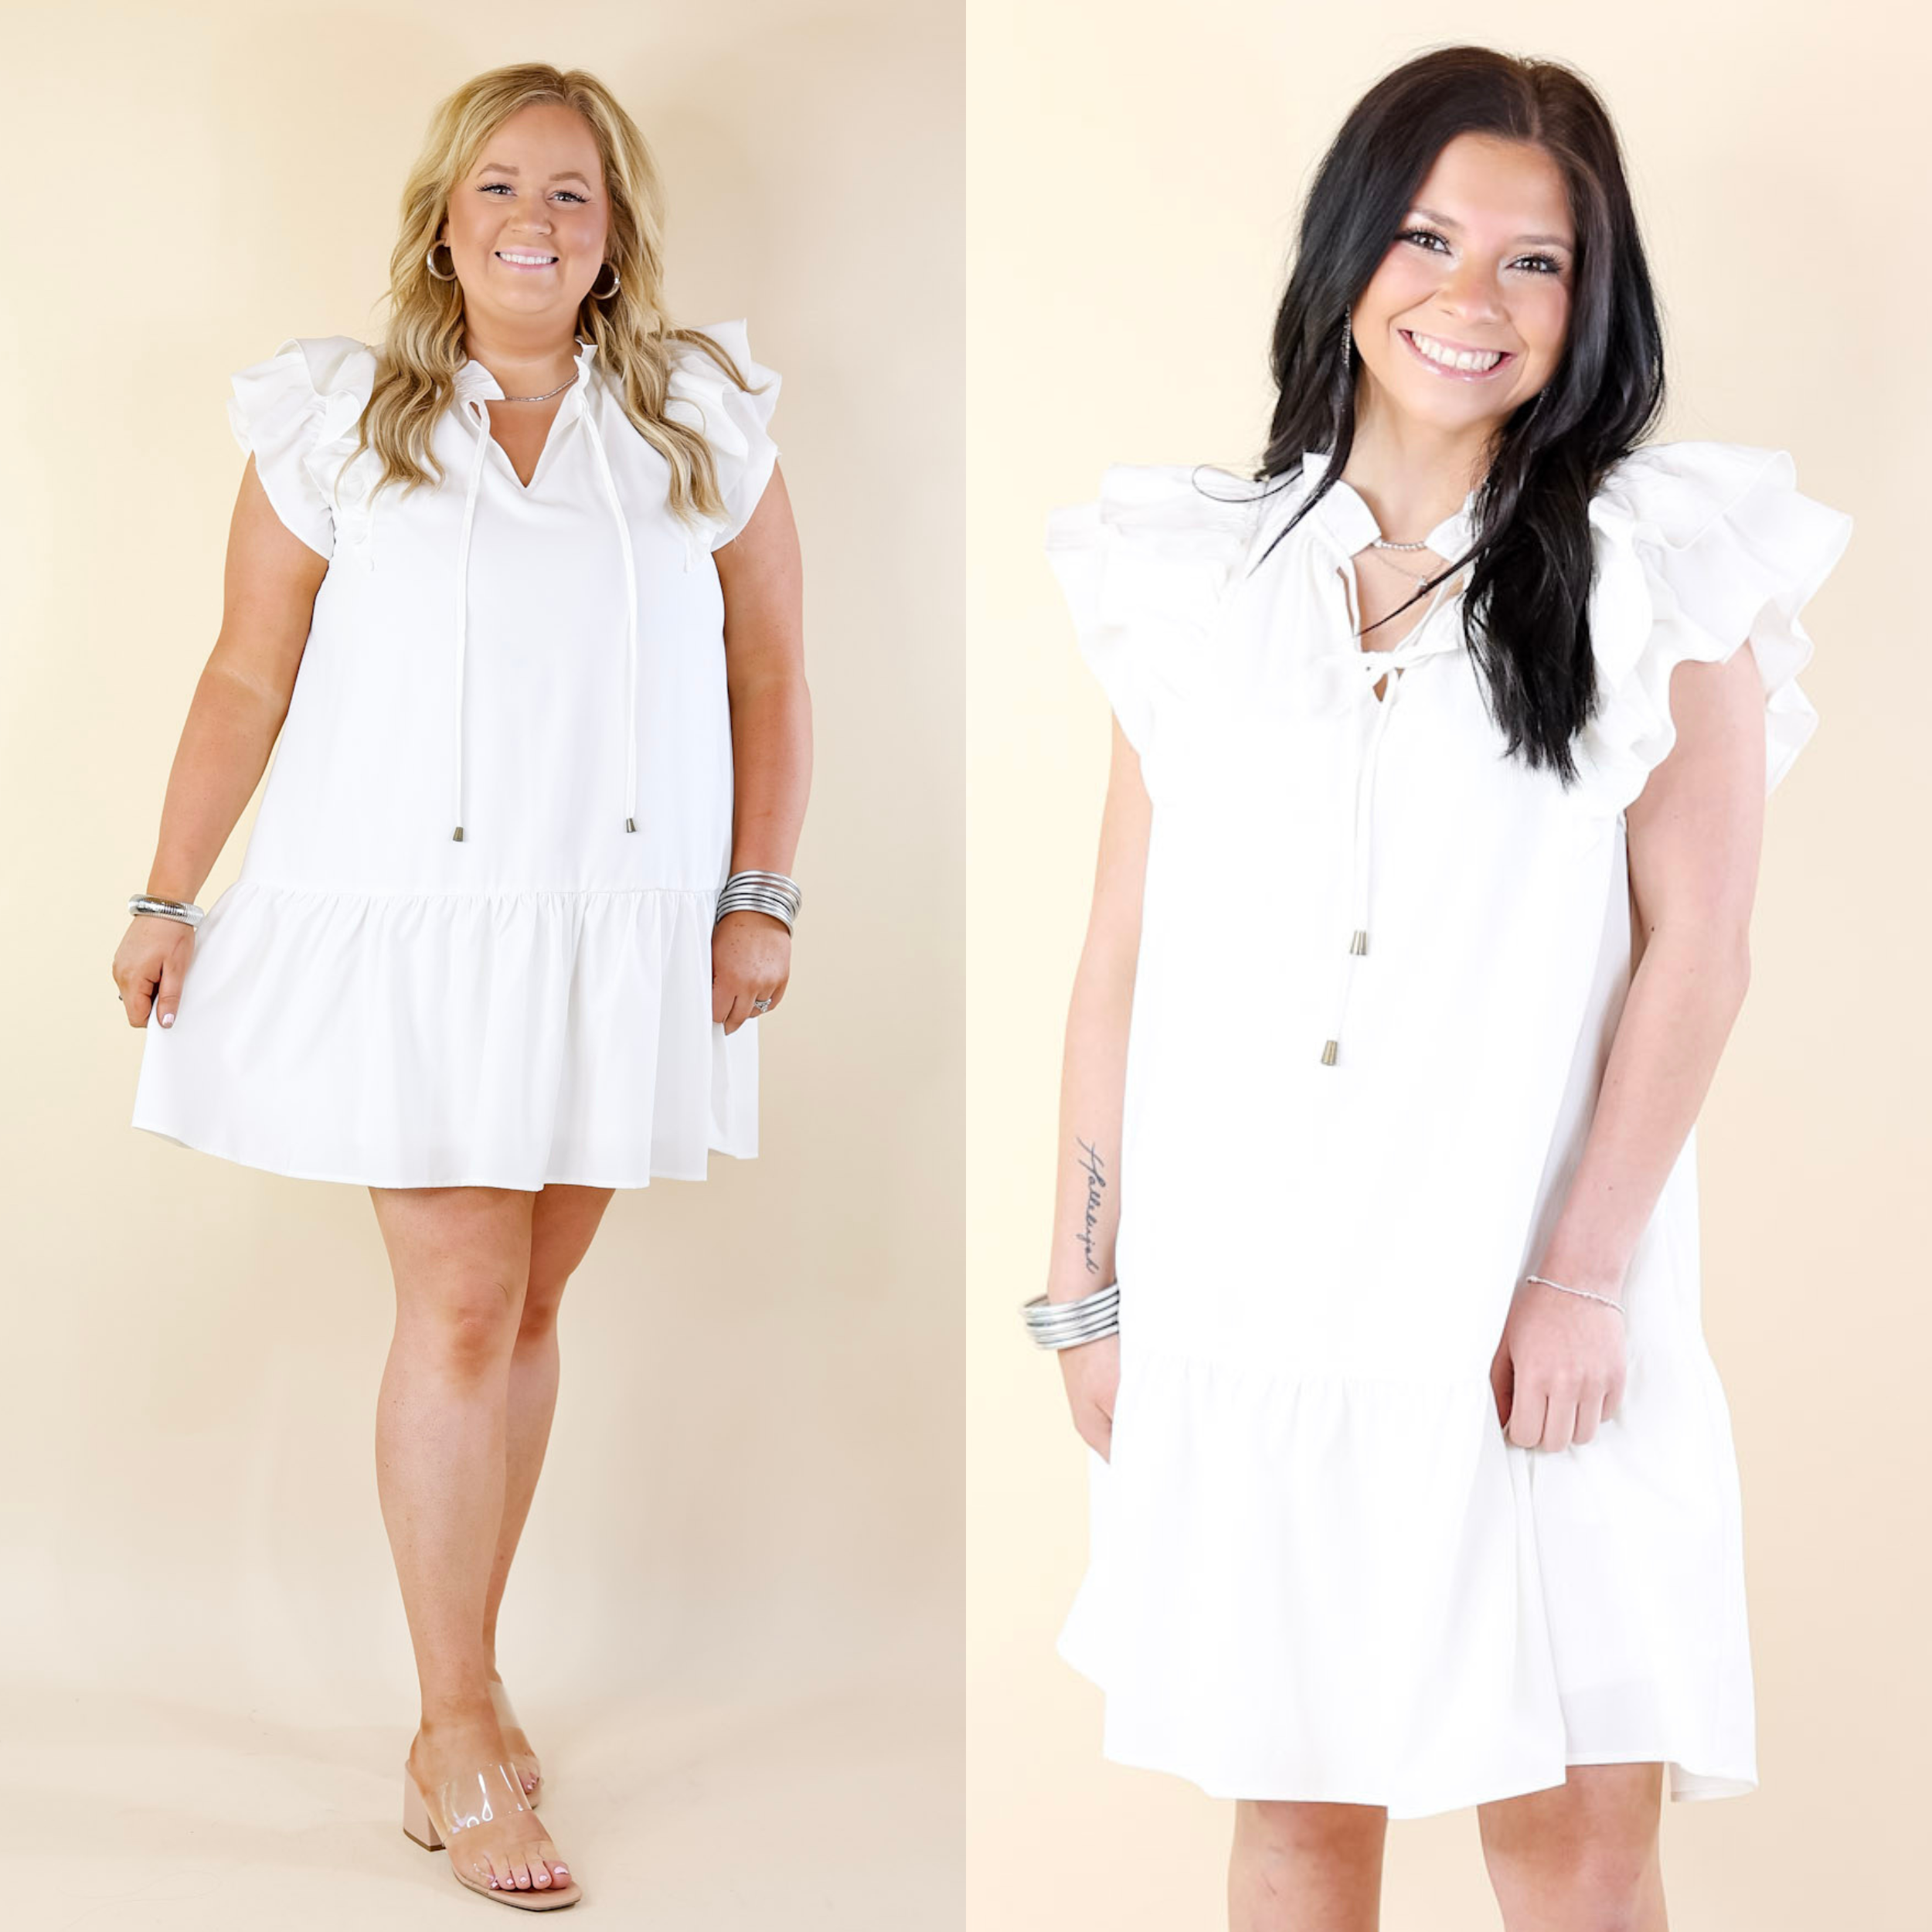 Powerful Love Ruffle Cap Sleeve Dress with Keyhole and Tie Neckline in Ivory - Giddy Up Glamour Boutique